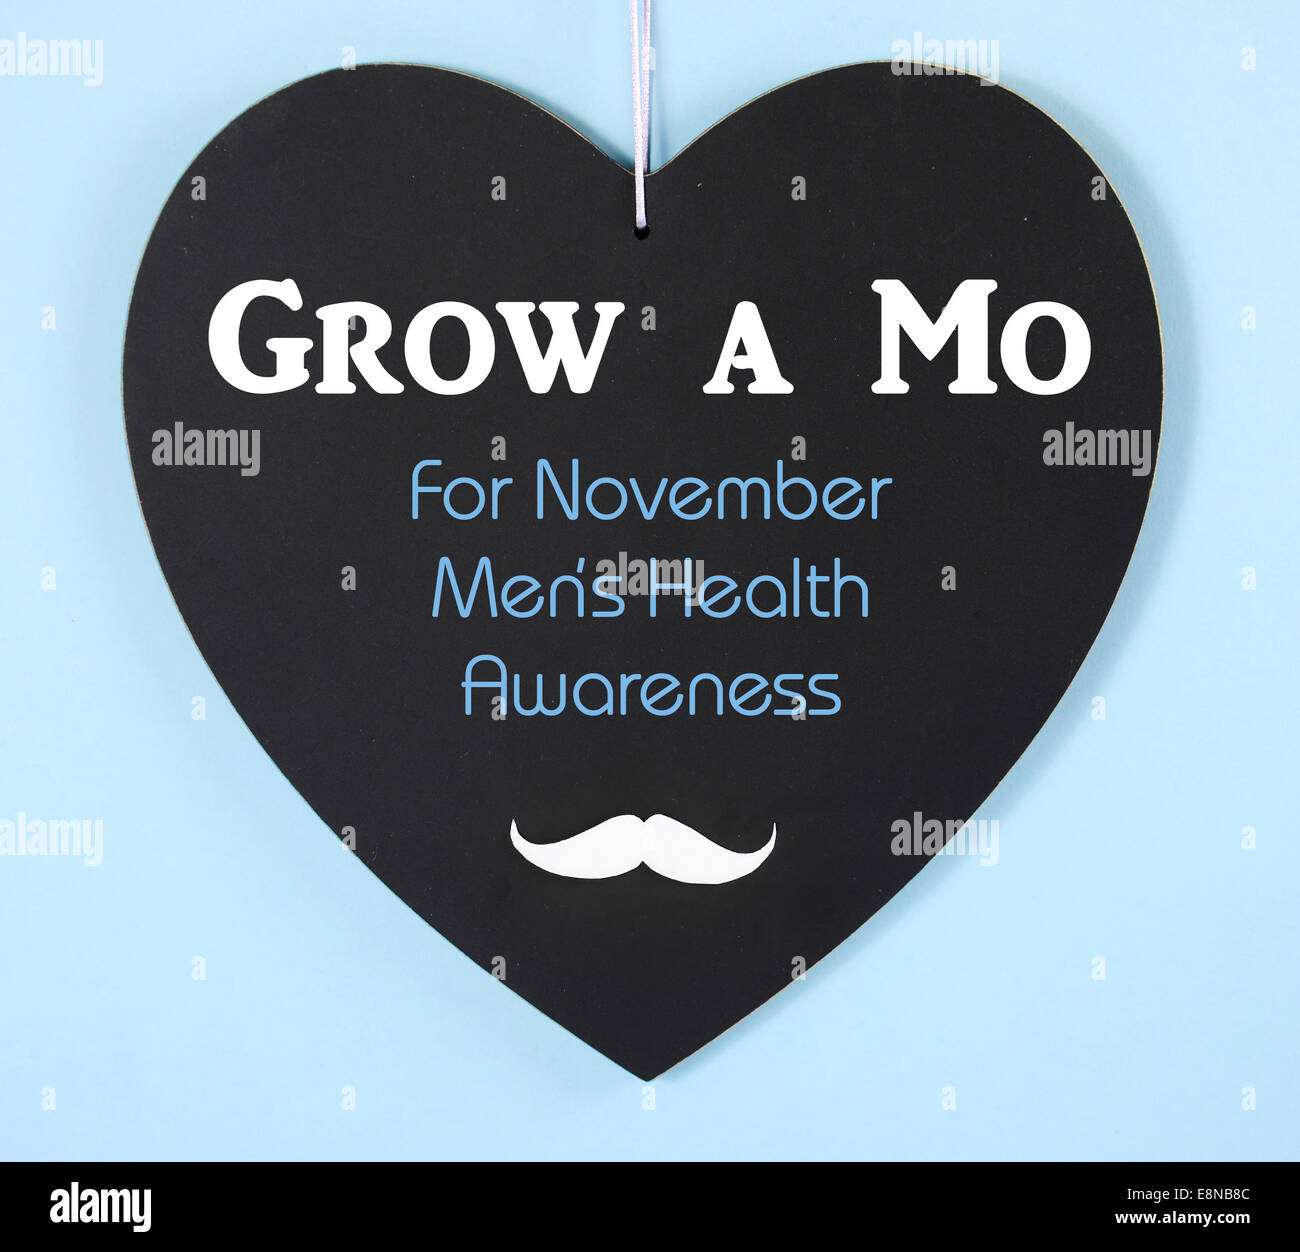 Grow a Moustache message on heart shaped blackboard for November Mens Health Issues Awareness Stock Photo